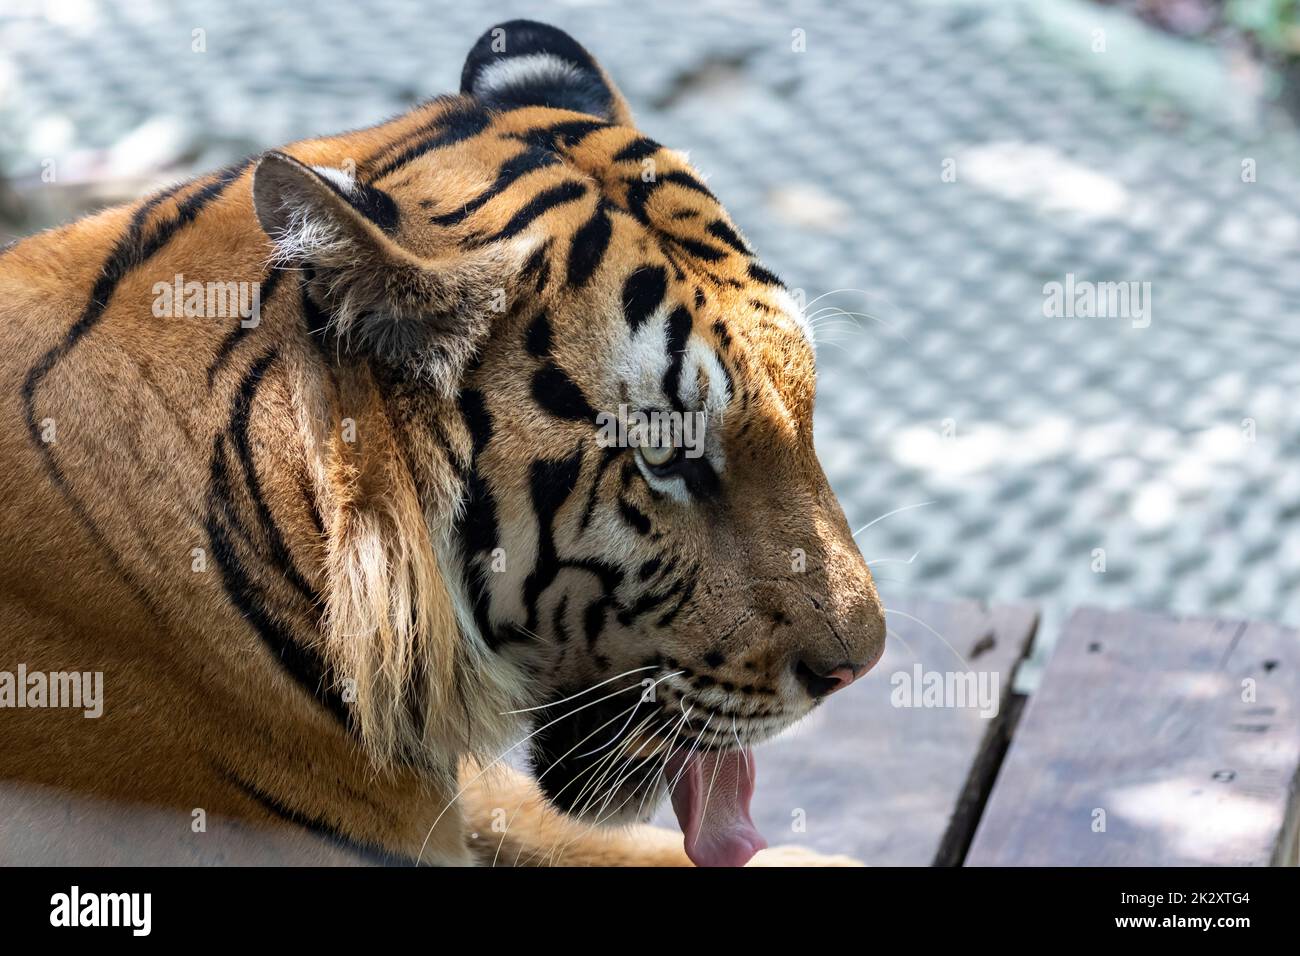 A photo of a tiger's head facing to the right while sticking its tongue out to cool off on a hot day in Thailand. Stock Photo